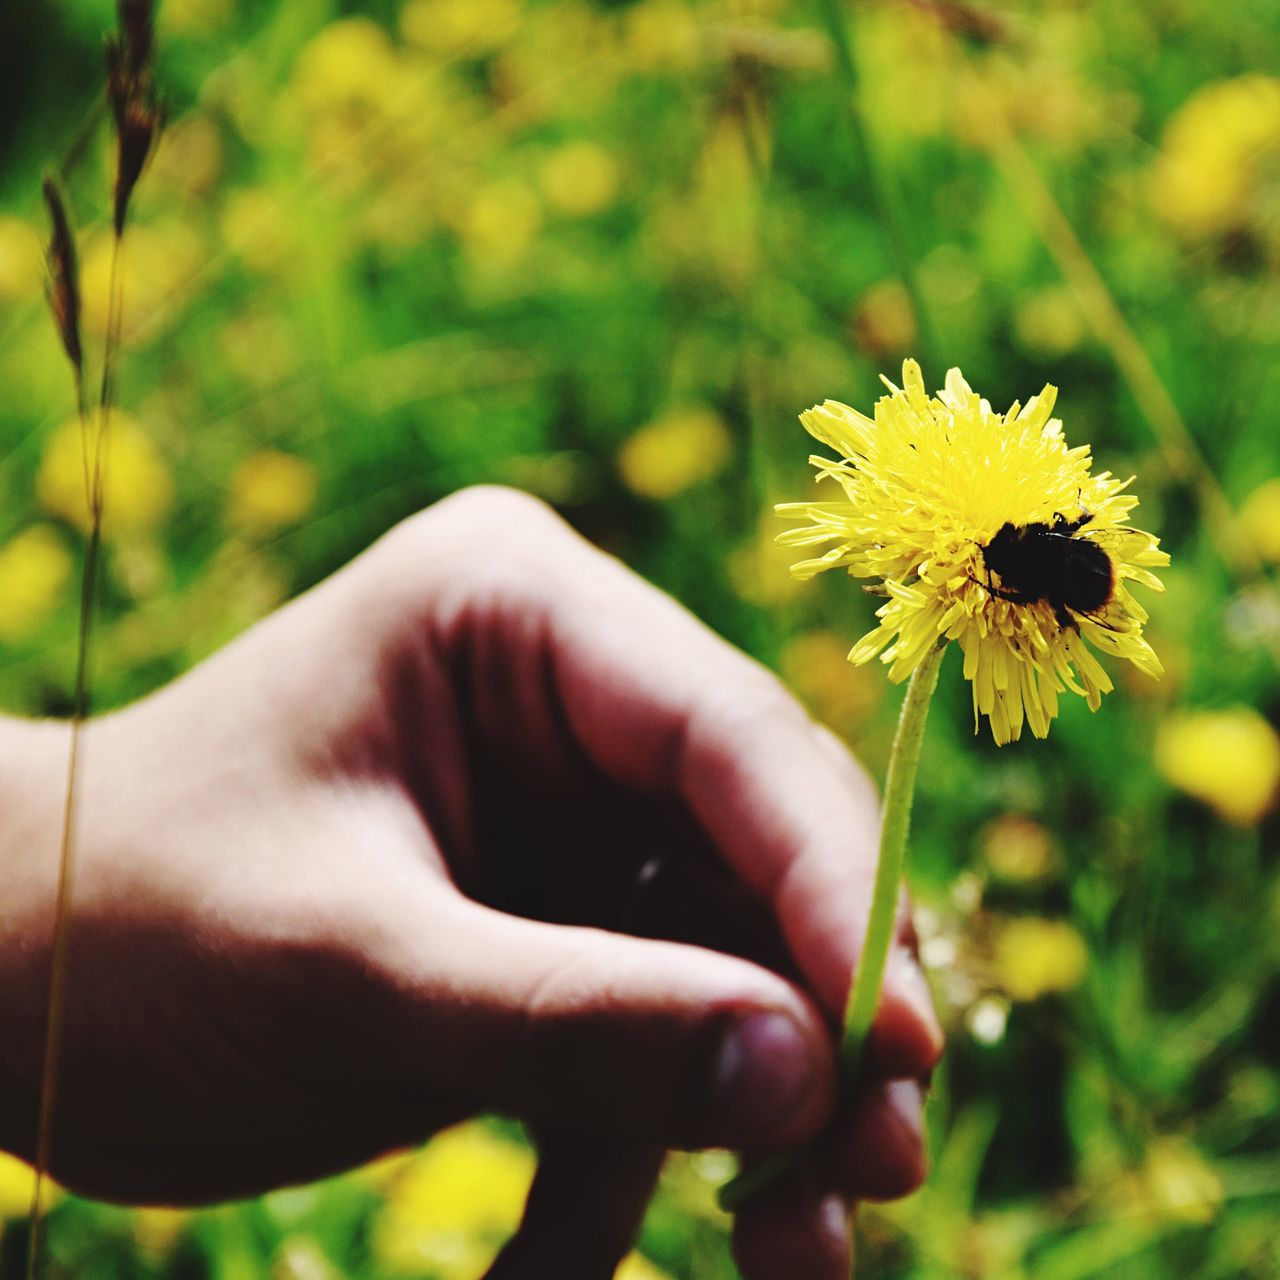 human hand, flower, focus on foreground, human body part, flower head, yellow, one person, real people, outdoors, close-up, plant, fragility, day, nature, freshness